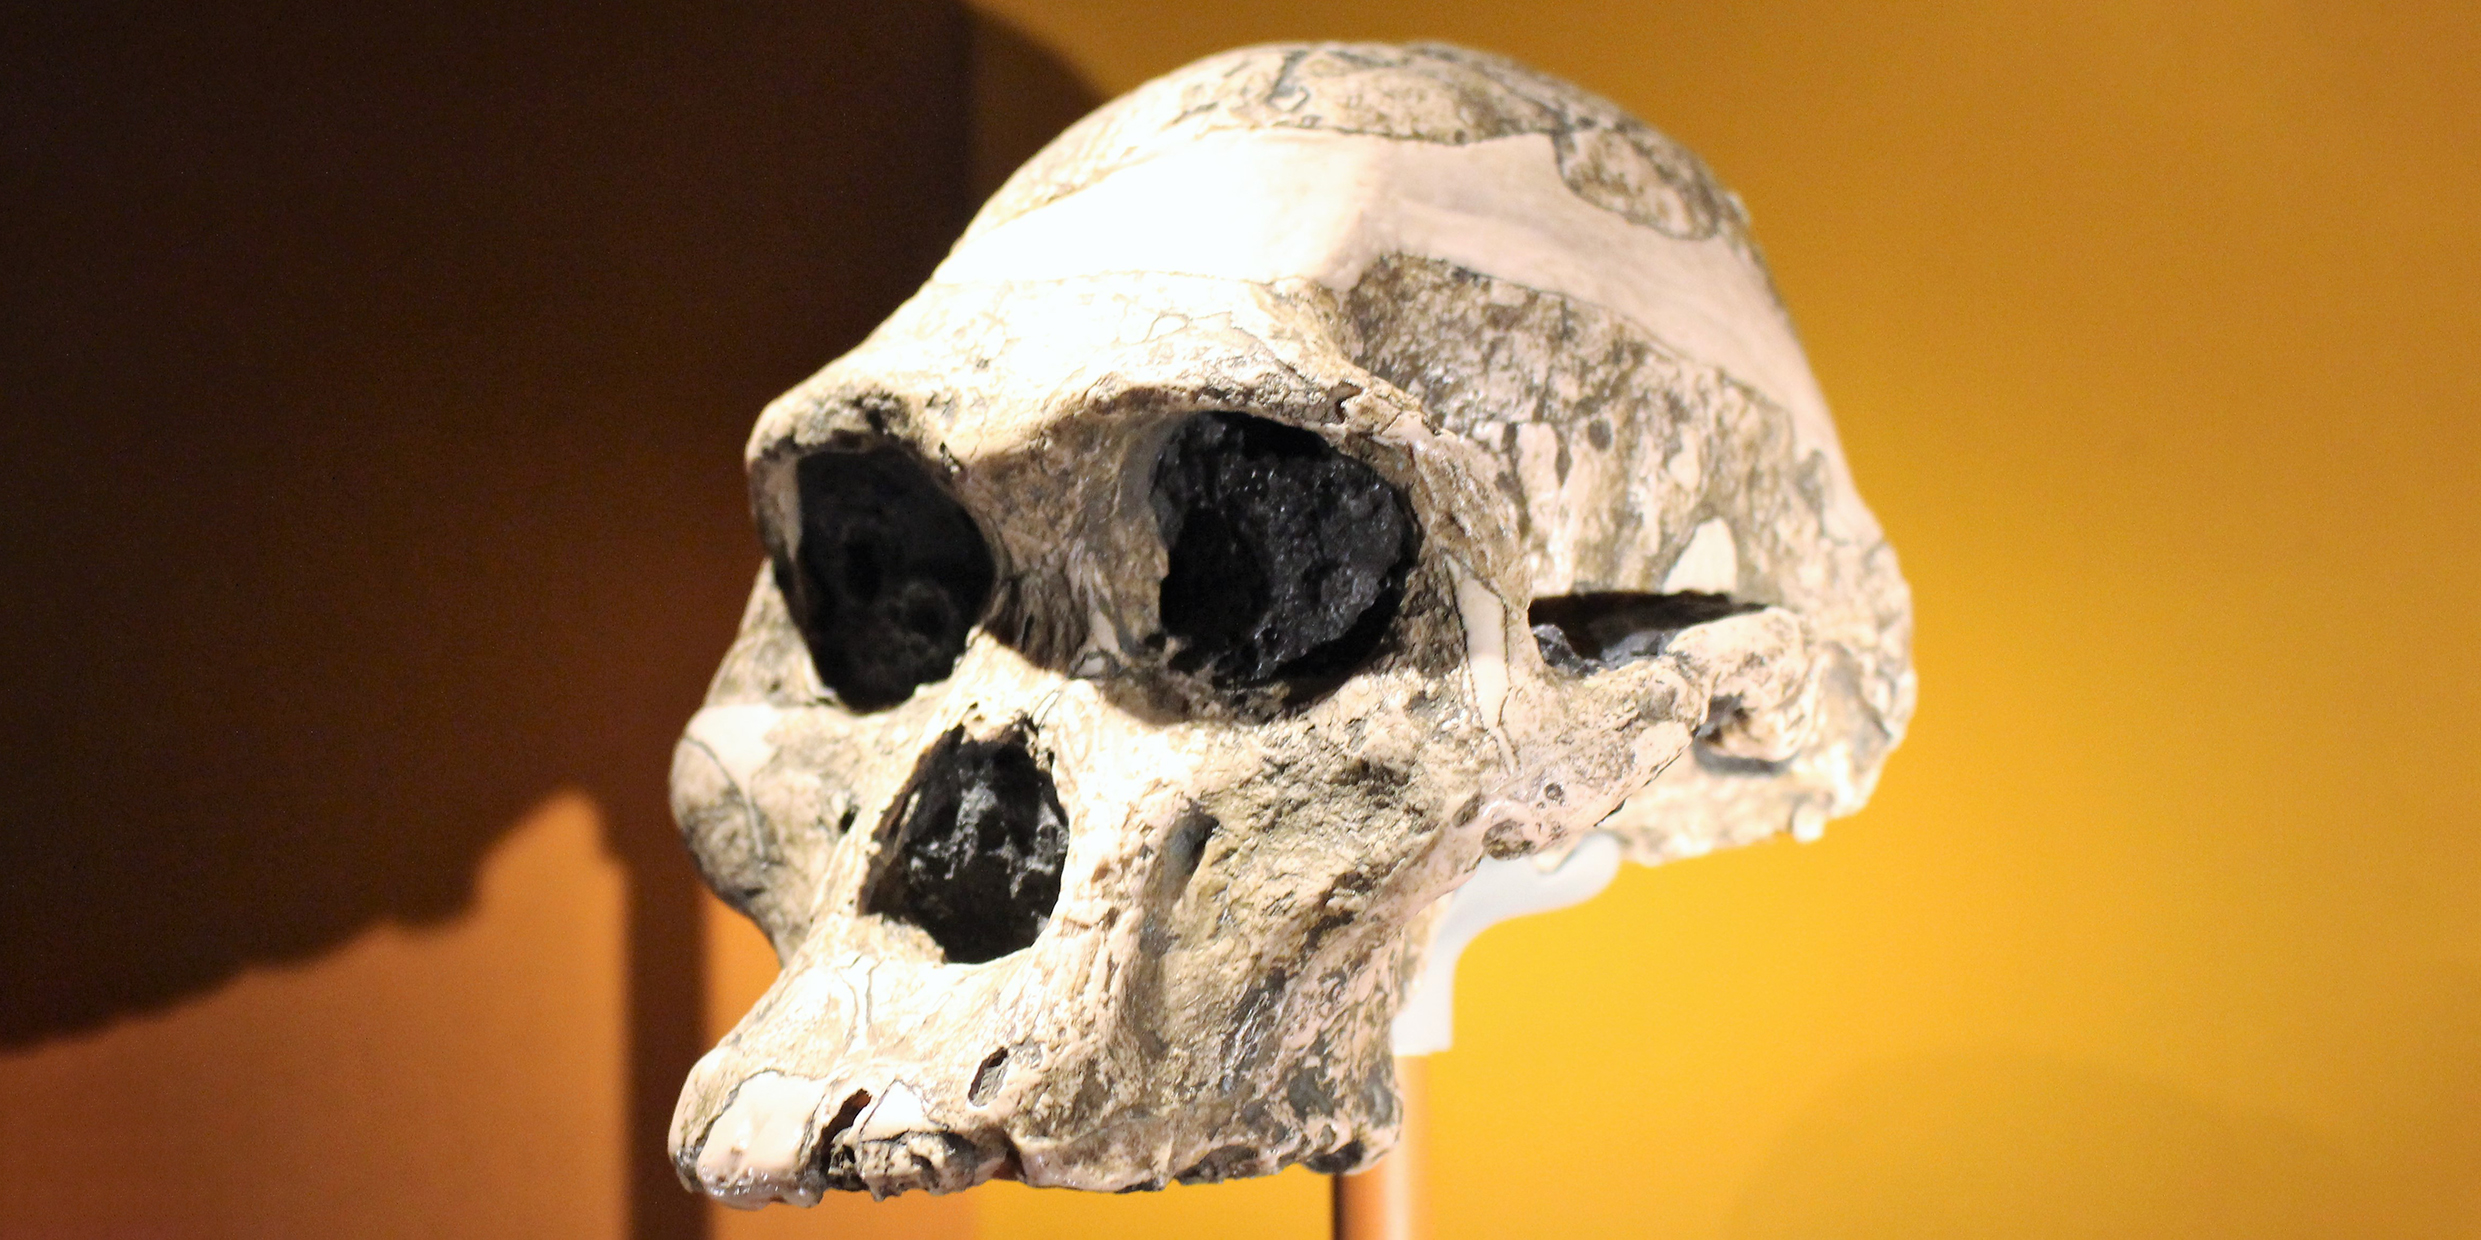 Image of a fossilized skull of Australopithecus africanus